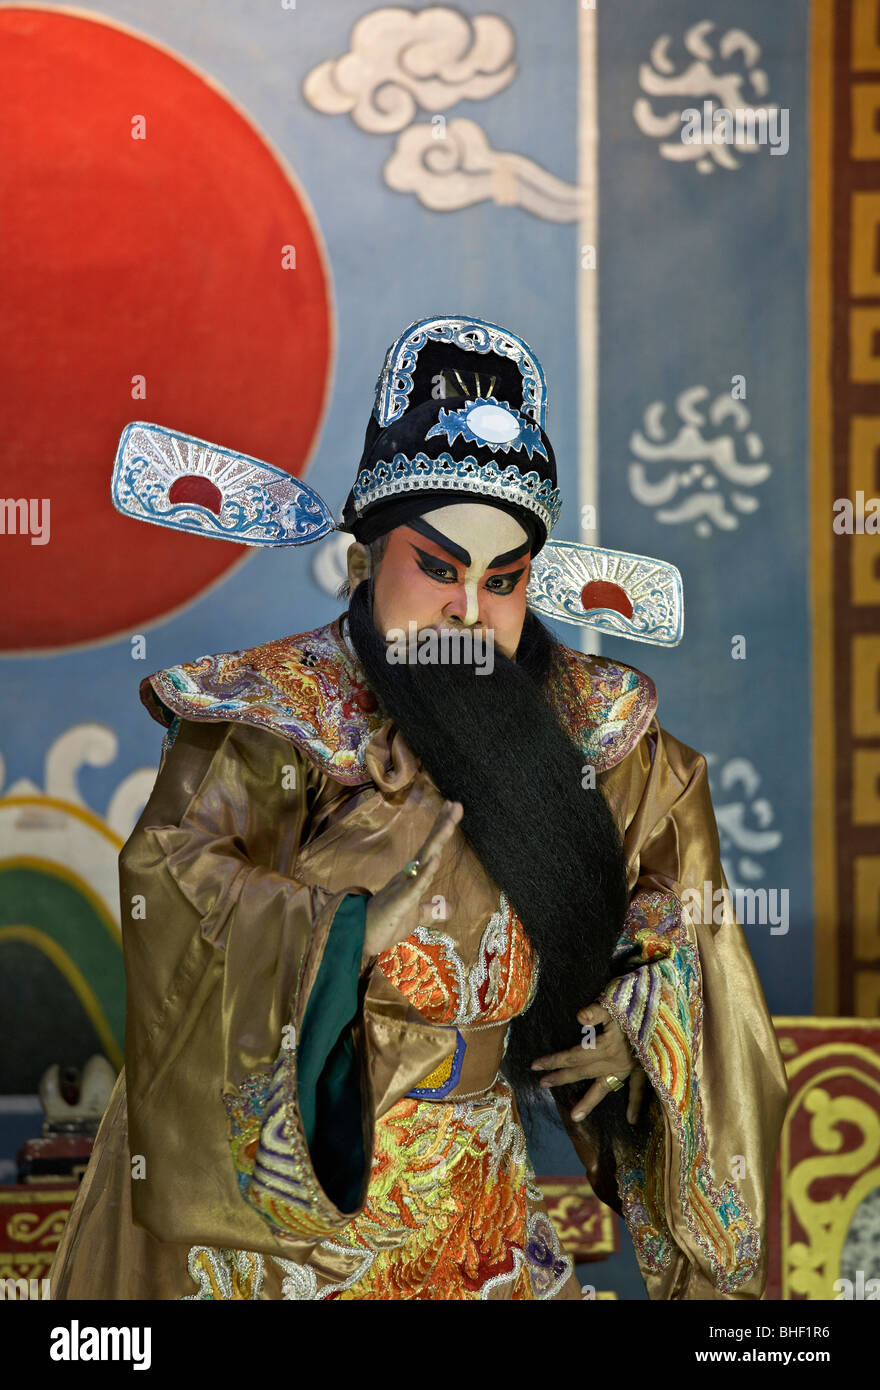 Chinese opera actor on stage in traditional colourful costume and make up. Thailand S. E. Asia Stock Photo